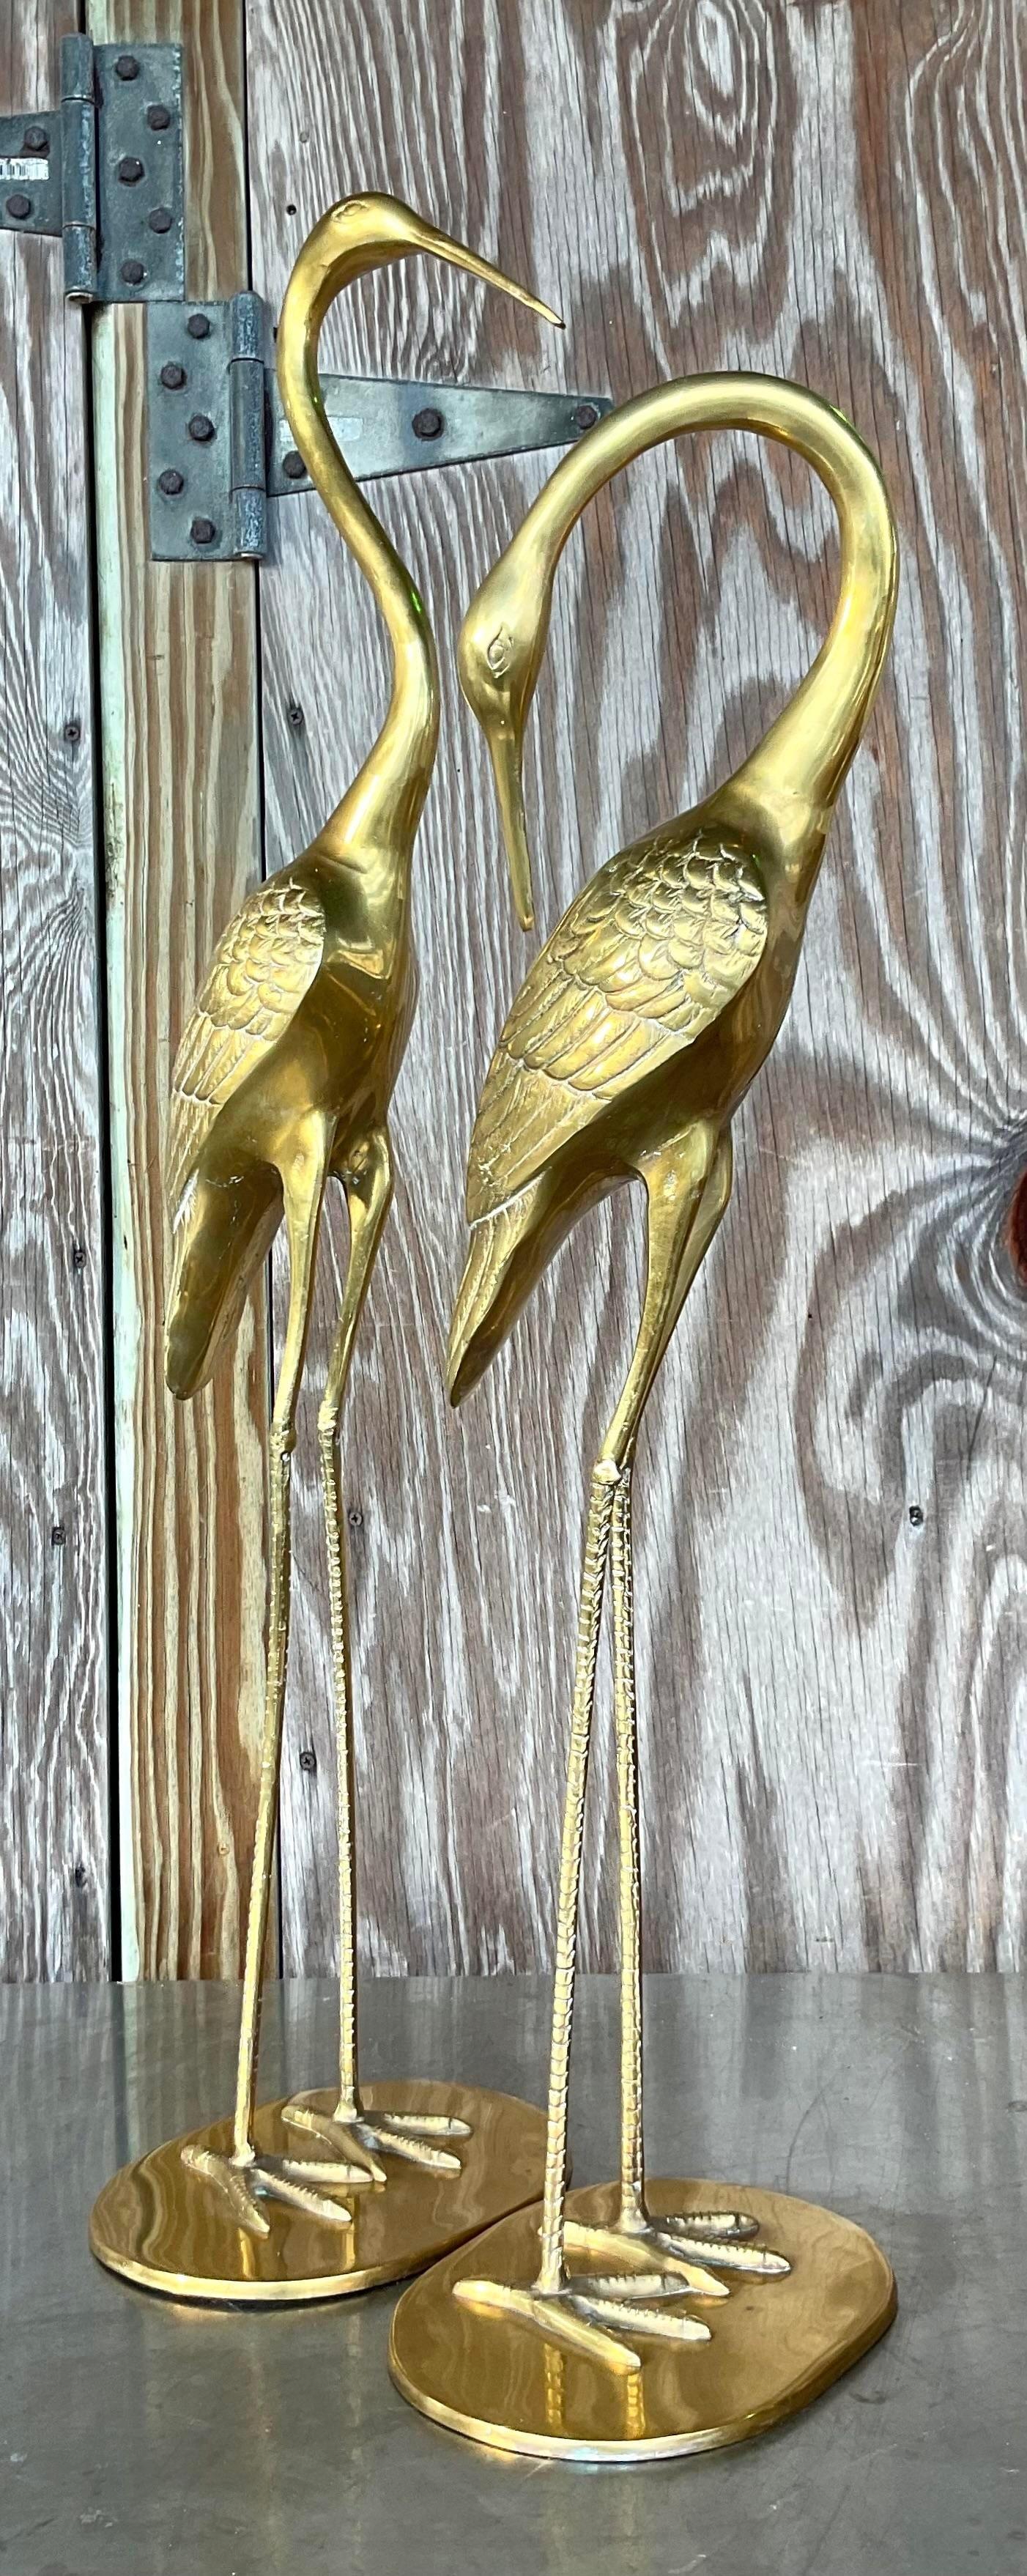 Vintage Coastal Polished Brass Canes - Set of 2 In Good Condition For Sale In west palm beach, FL